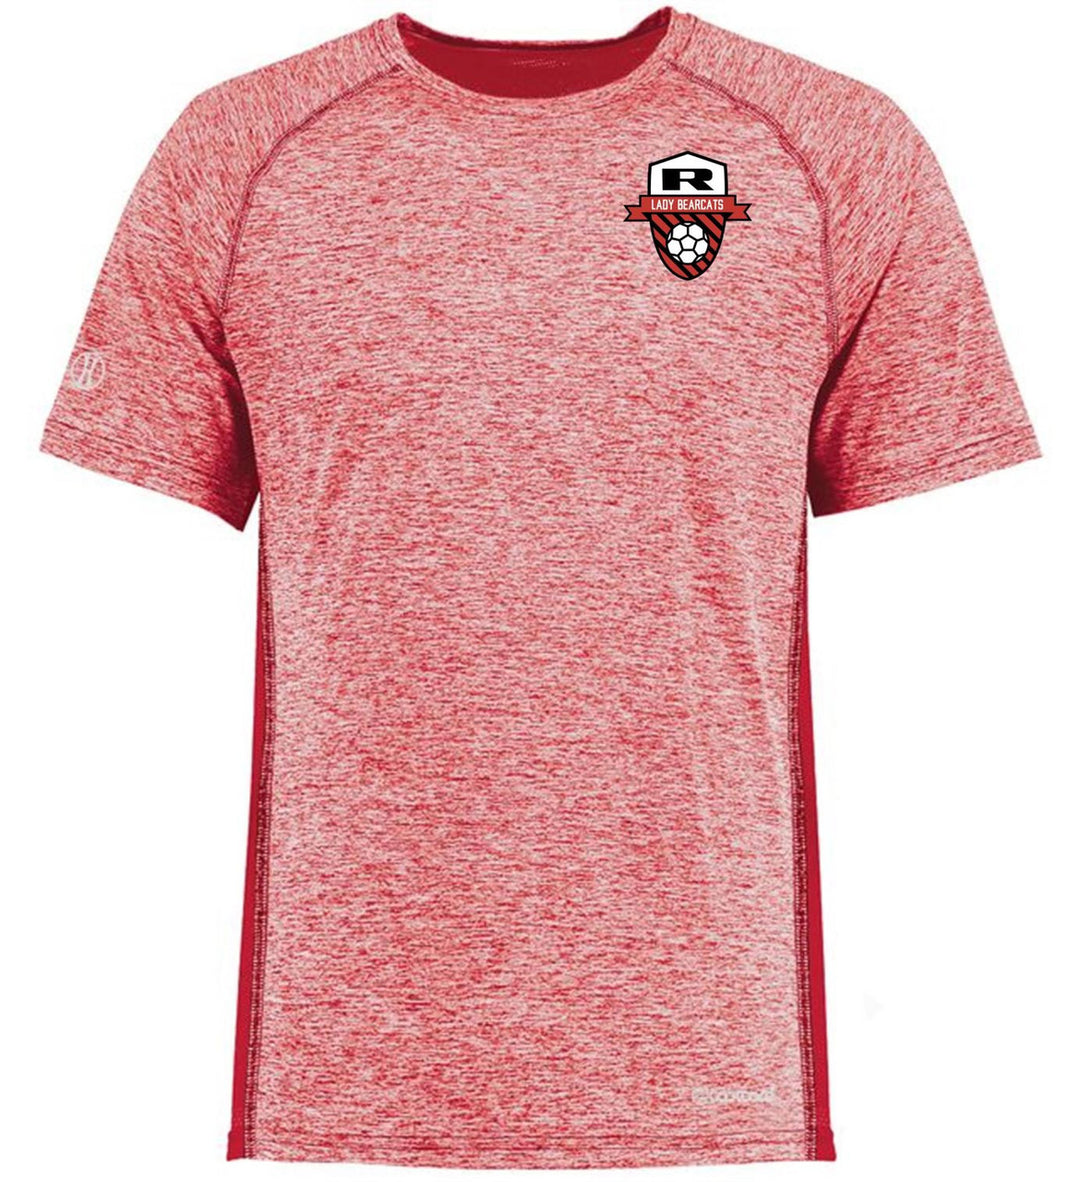 Holloway Ruston Hs Electrify Coolcore Tee Holloway RHS Mens Small Scarlet Heather - Third Coast Soccer